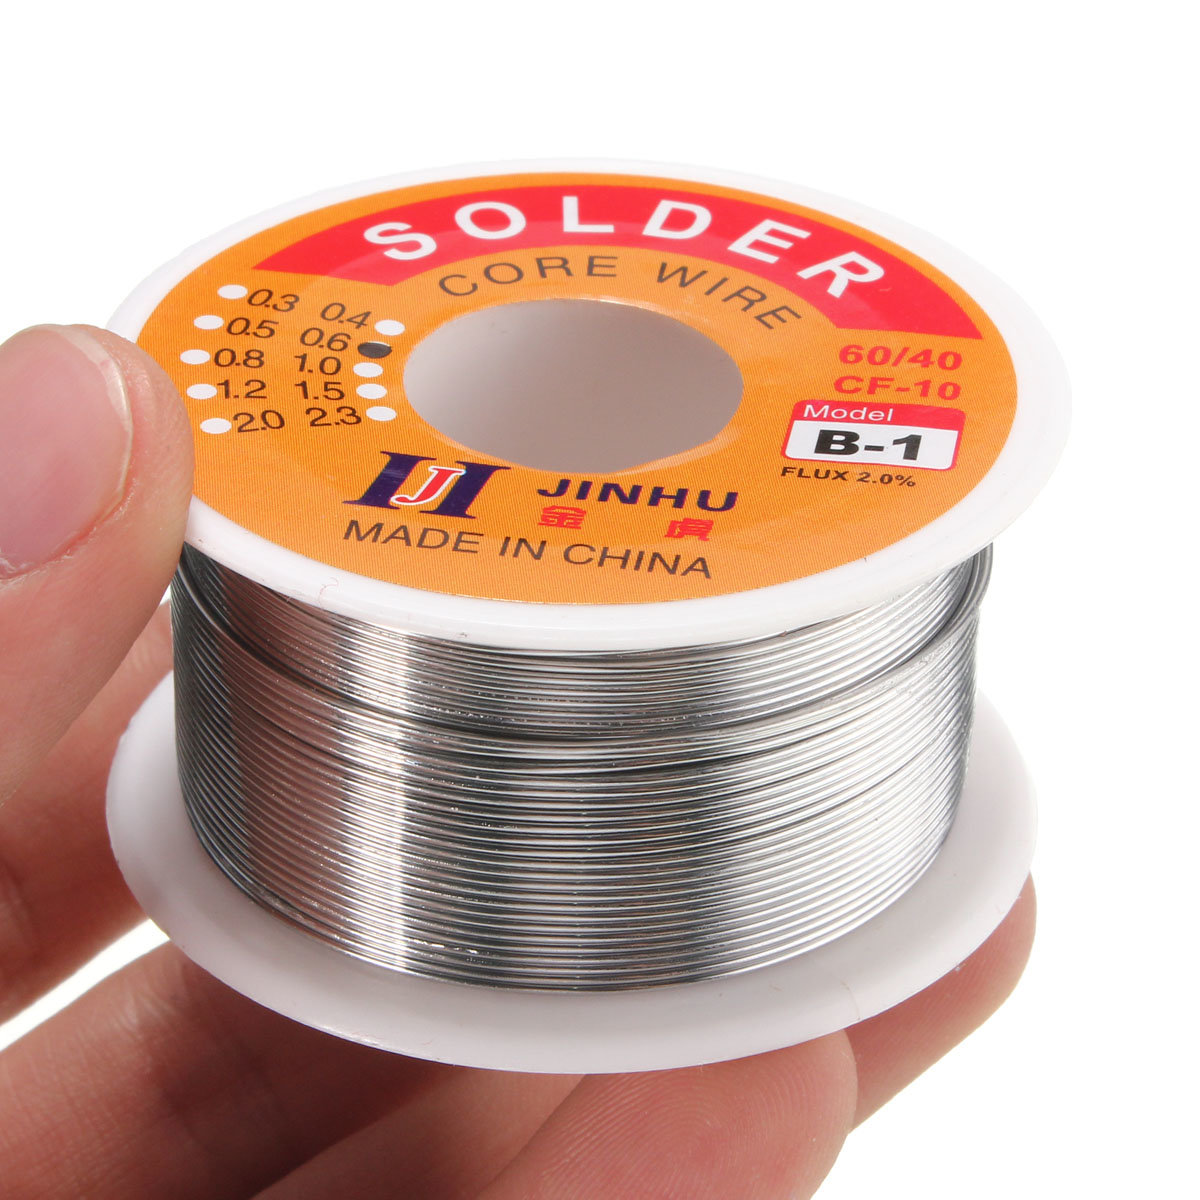 SILVERLINE AS16 FLUX COATED ELECTRICAL SOLDER 40/60 TIN/LEAD 20G x 1 